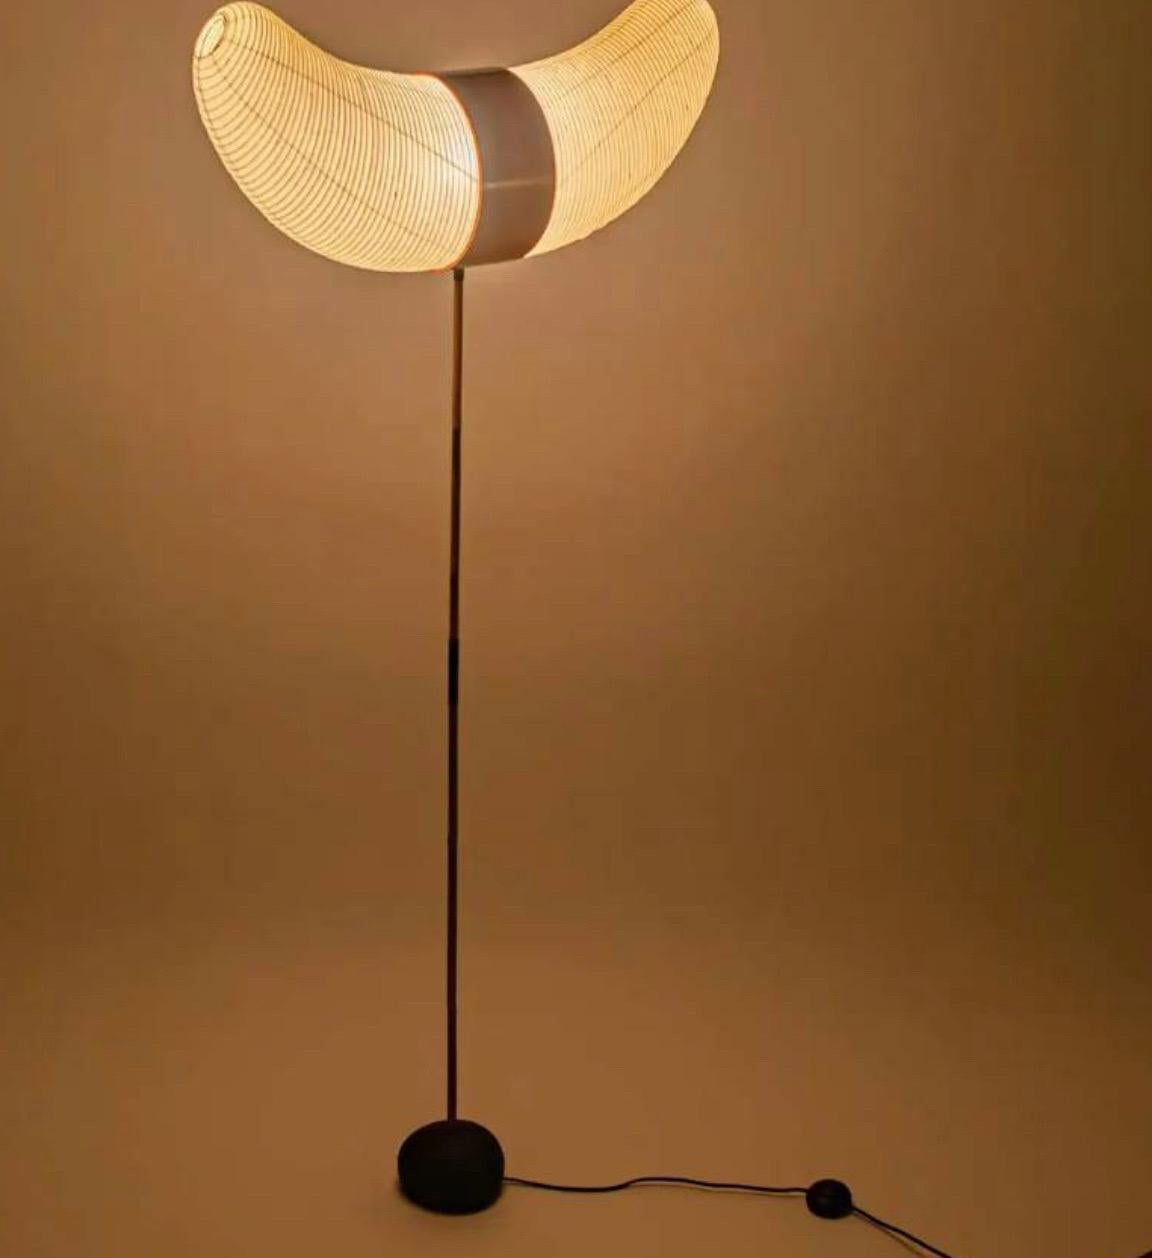 
Akari Light Sculptures by Isamu Noguchi are considered icons of 1950s modern design. Designed by Noguchi beginning in 1951 and handmade for a half century by the original manufacturer in Gifu, Japan, the paper lanterns are a harmonious blend of